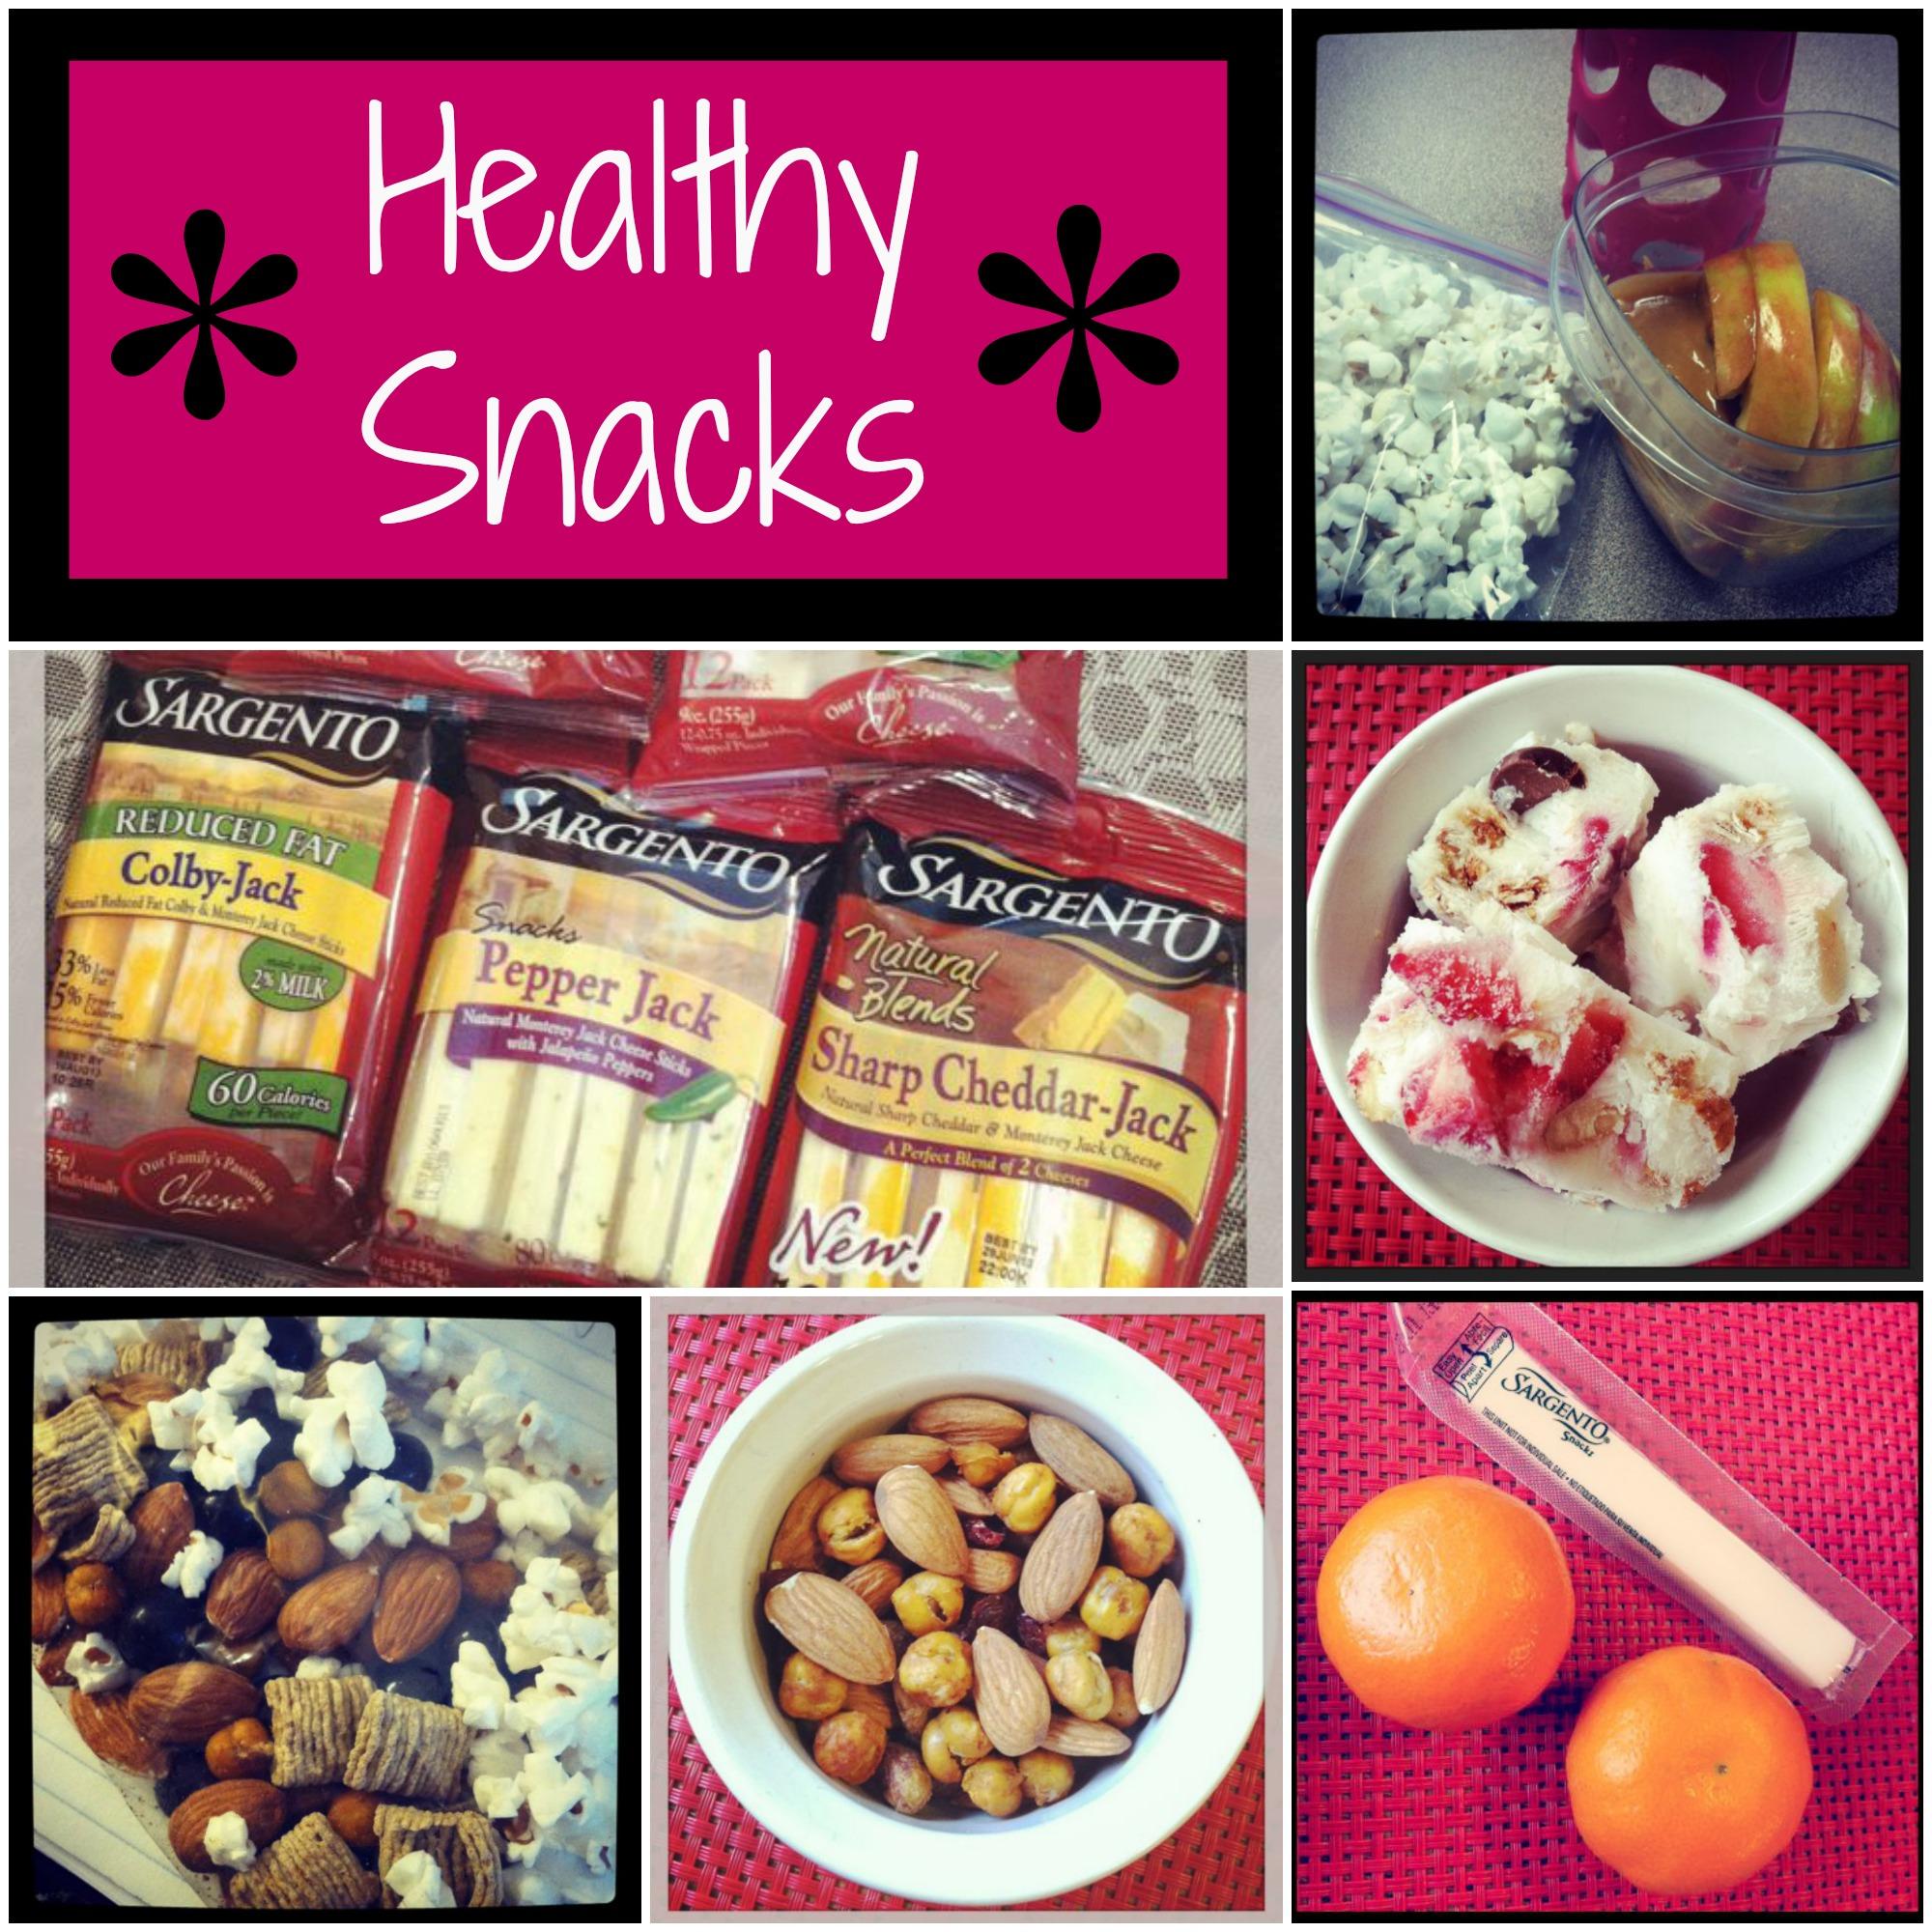 Hungry? Here are some healthy snack ideas from a Registered Dietitian! Perfect for kids and adults. 